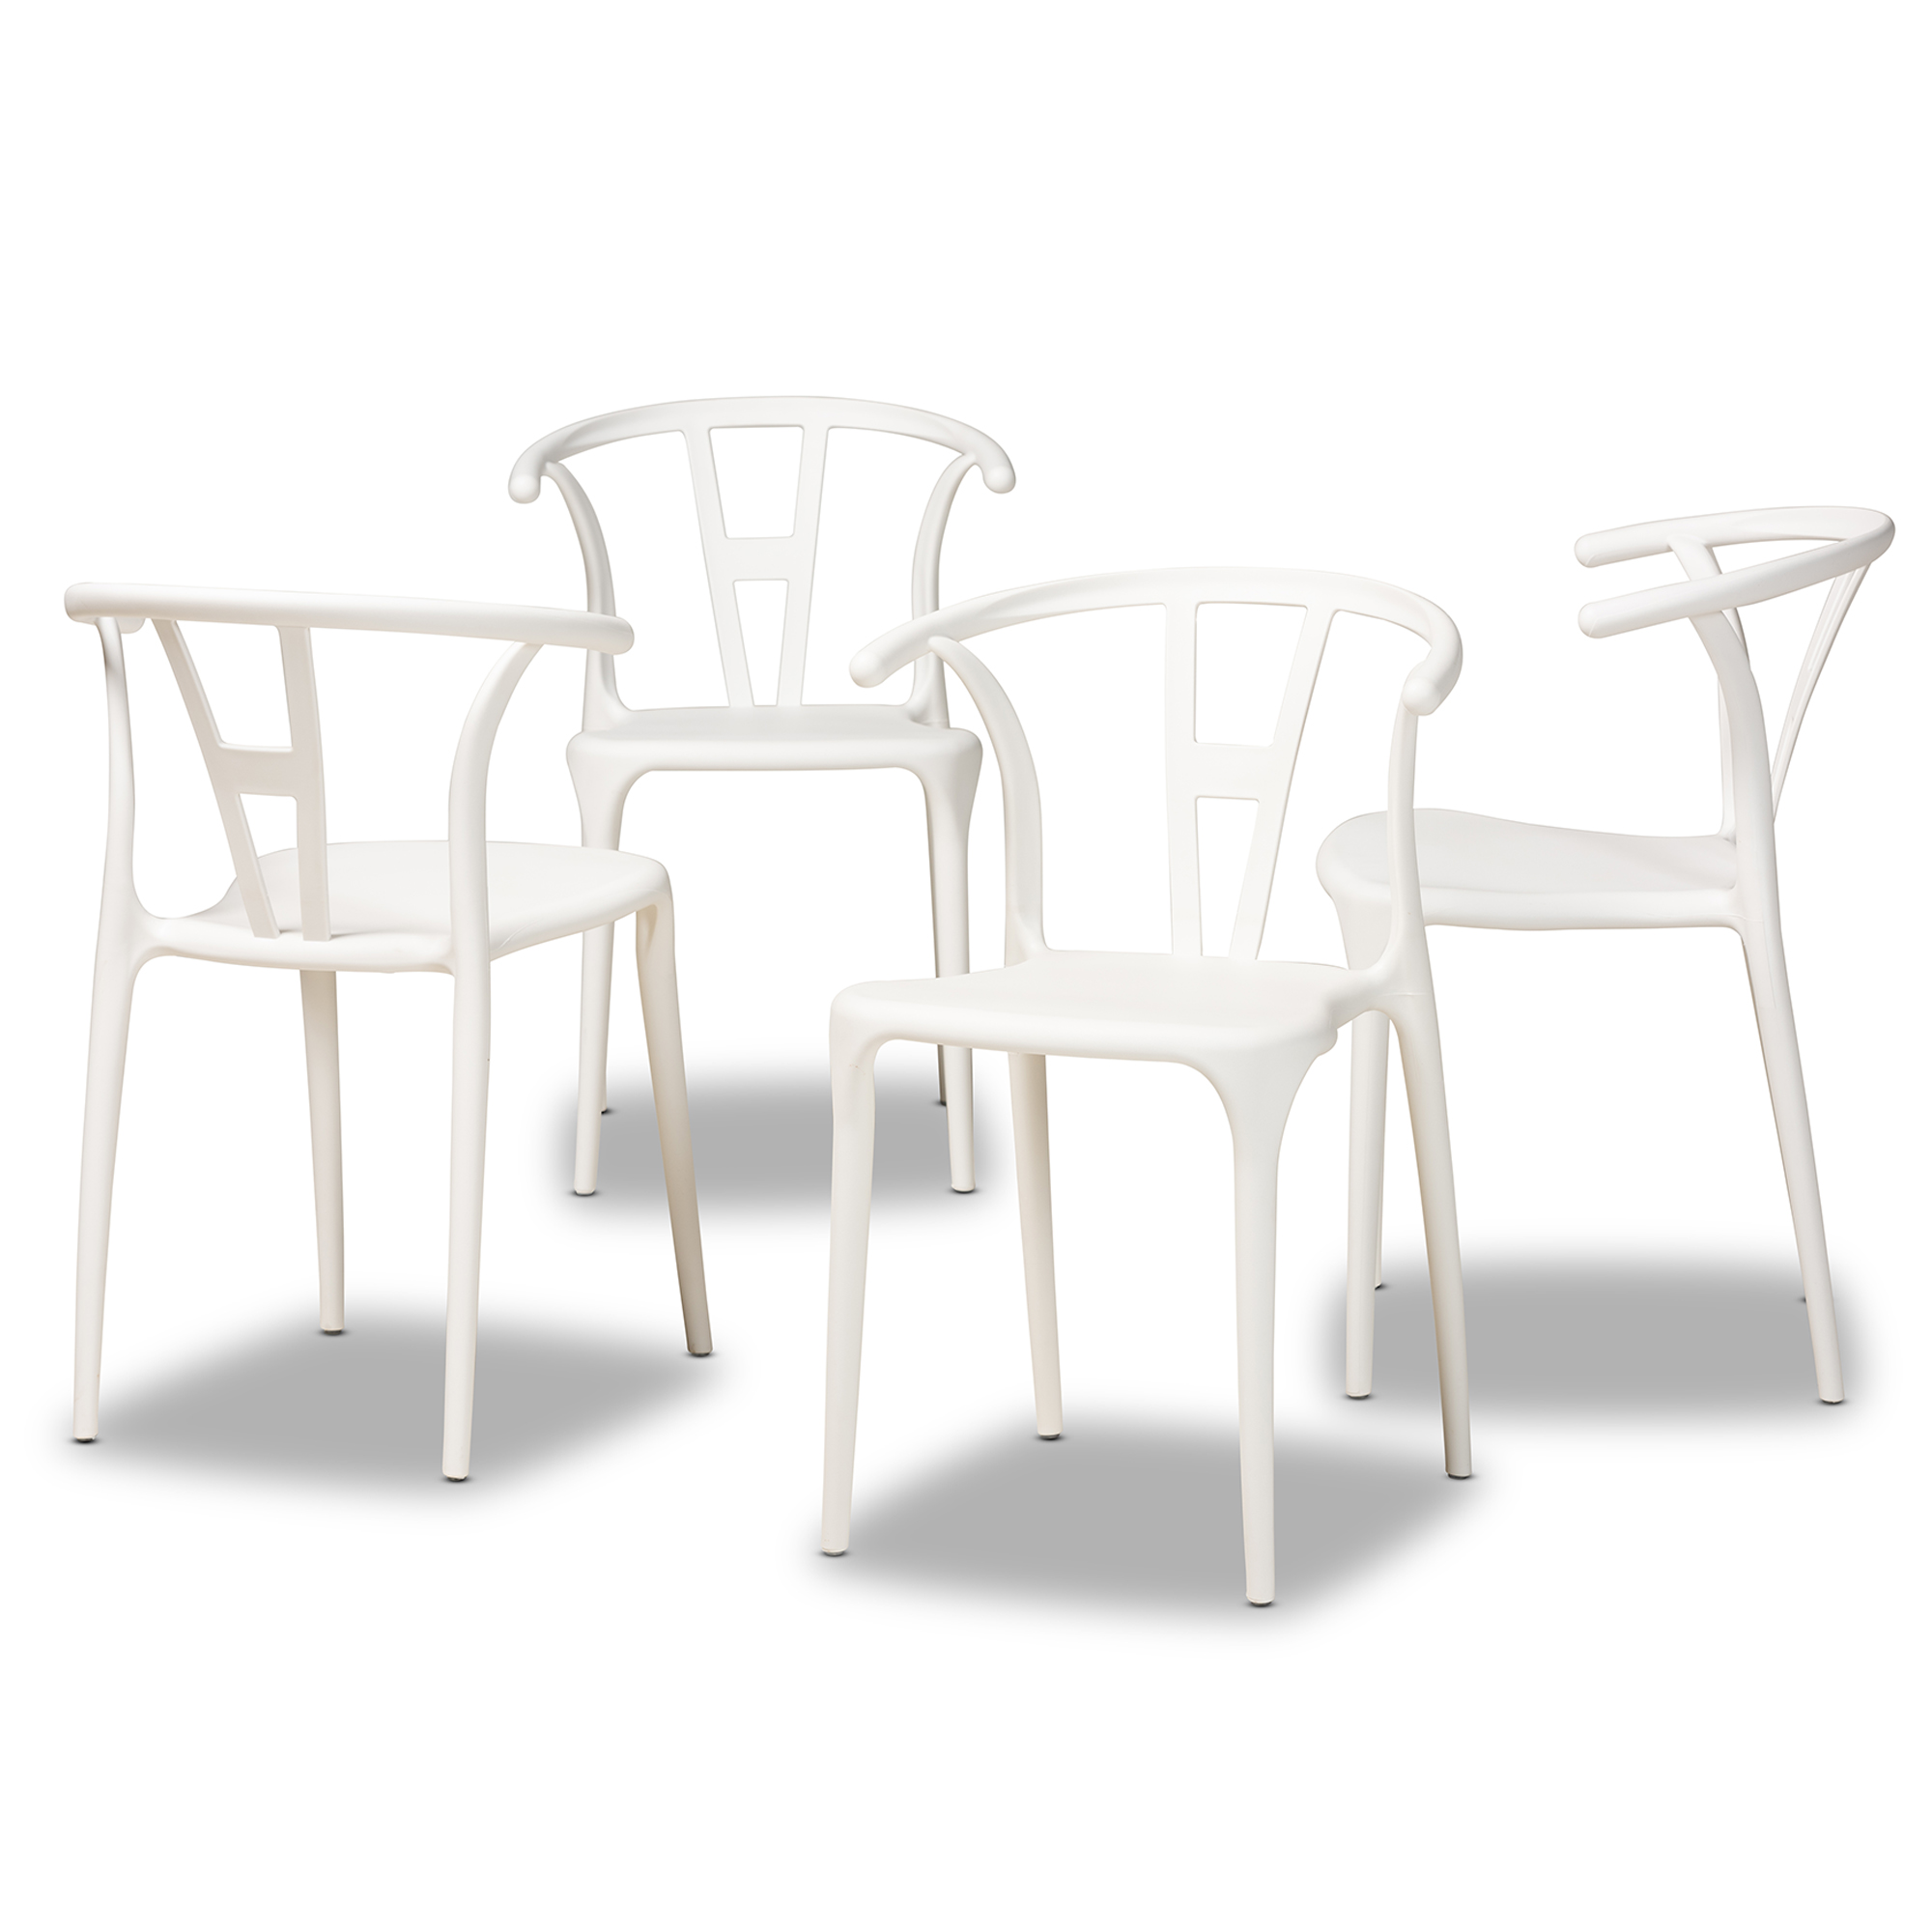 Baxton Studio Warner Modern and Contemporary White Plastic 4-Piece Dining Chair Set